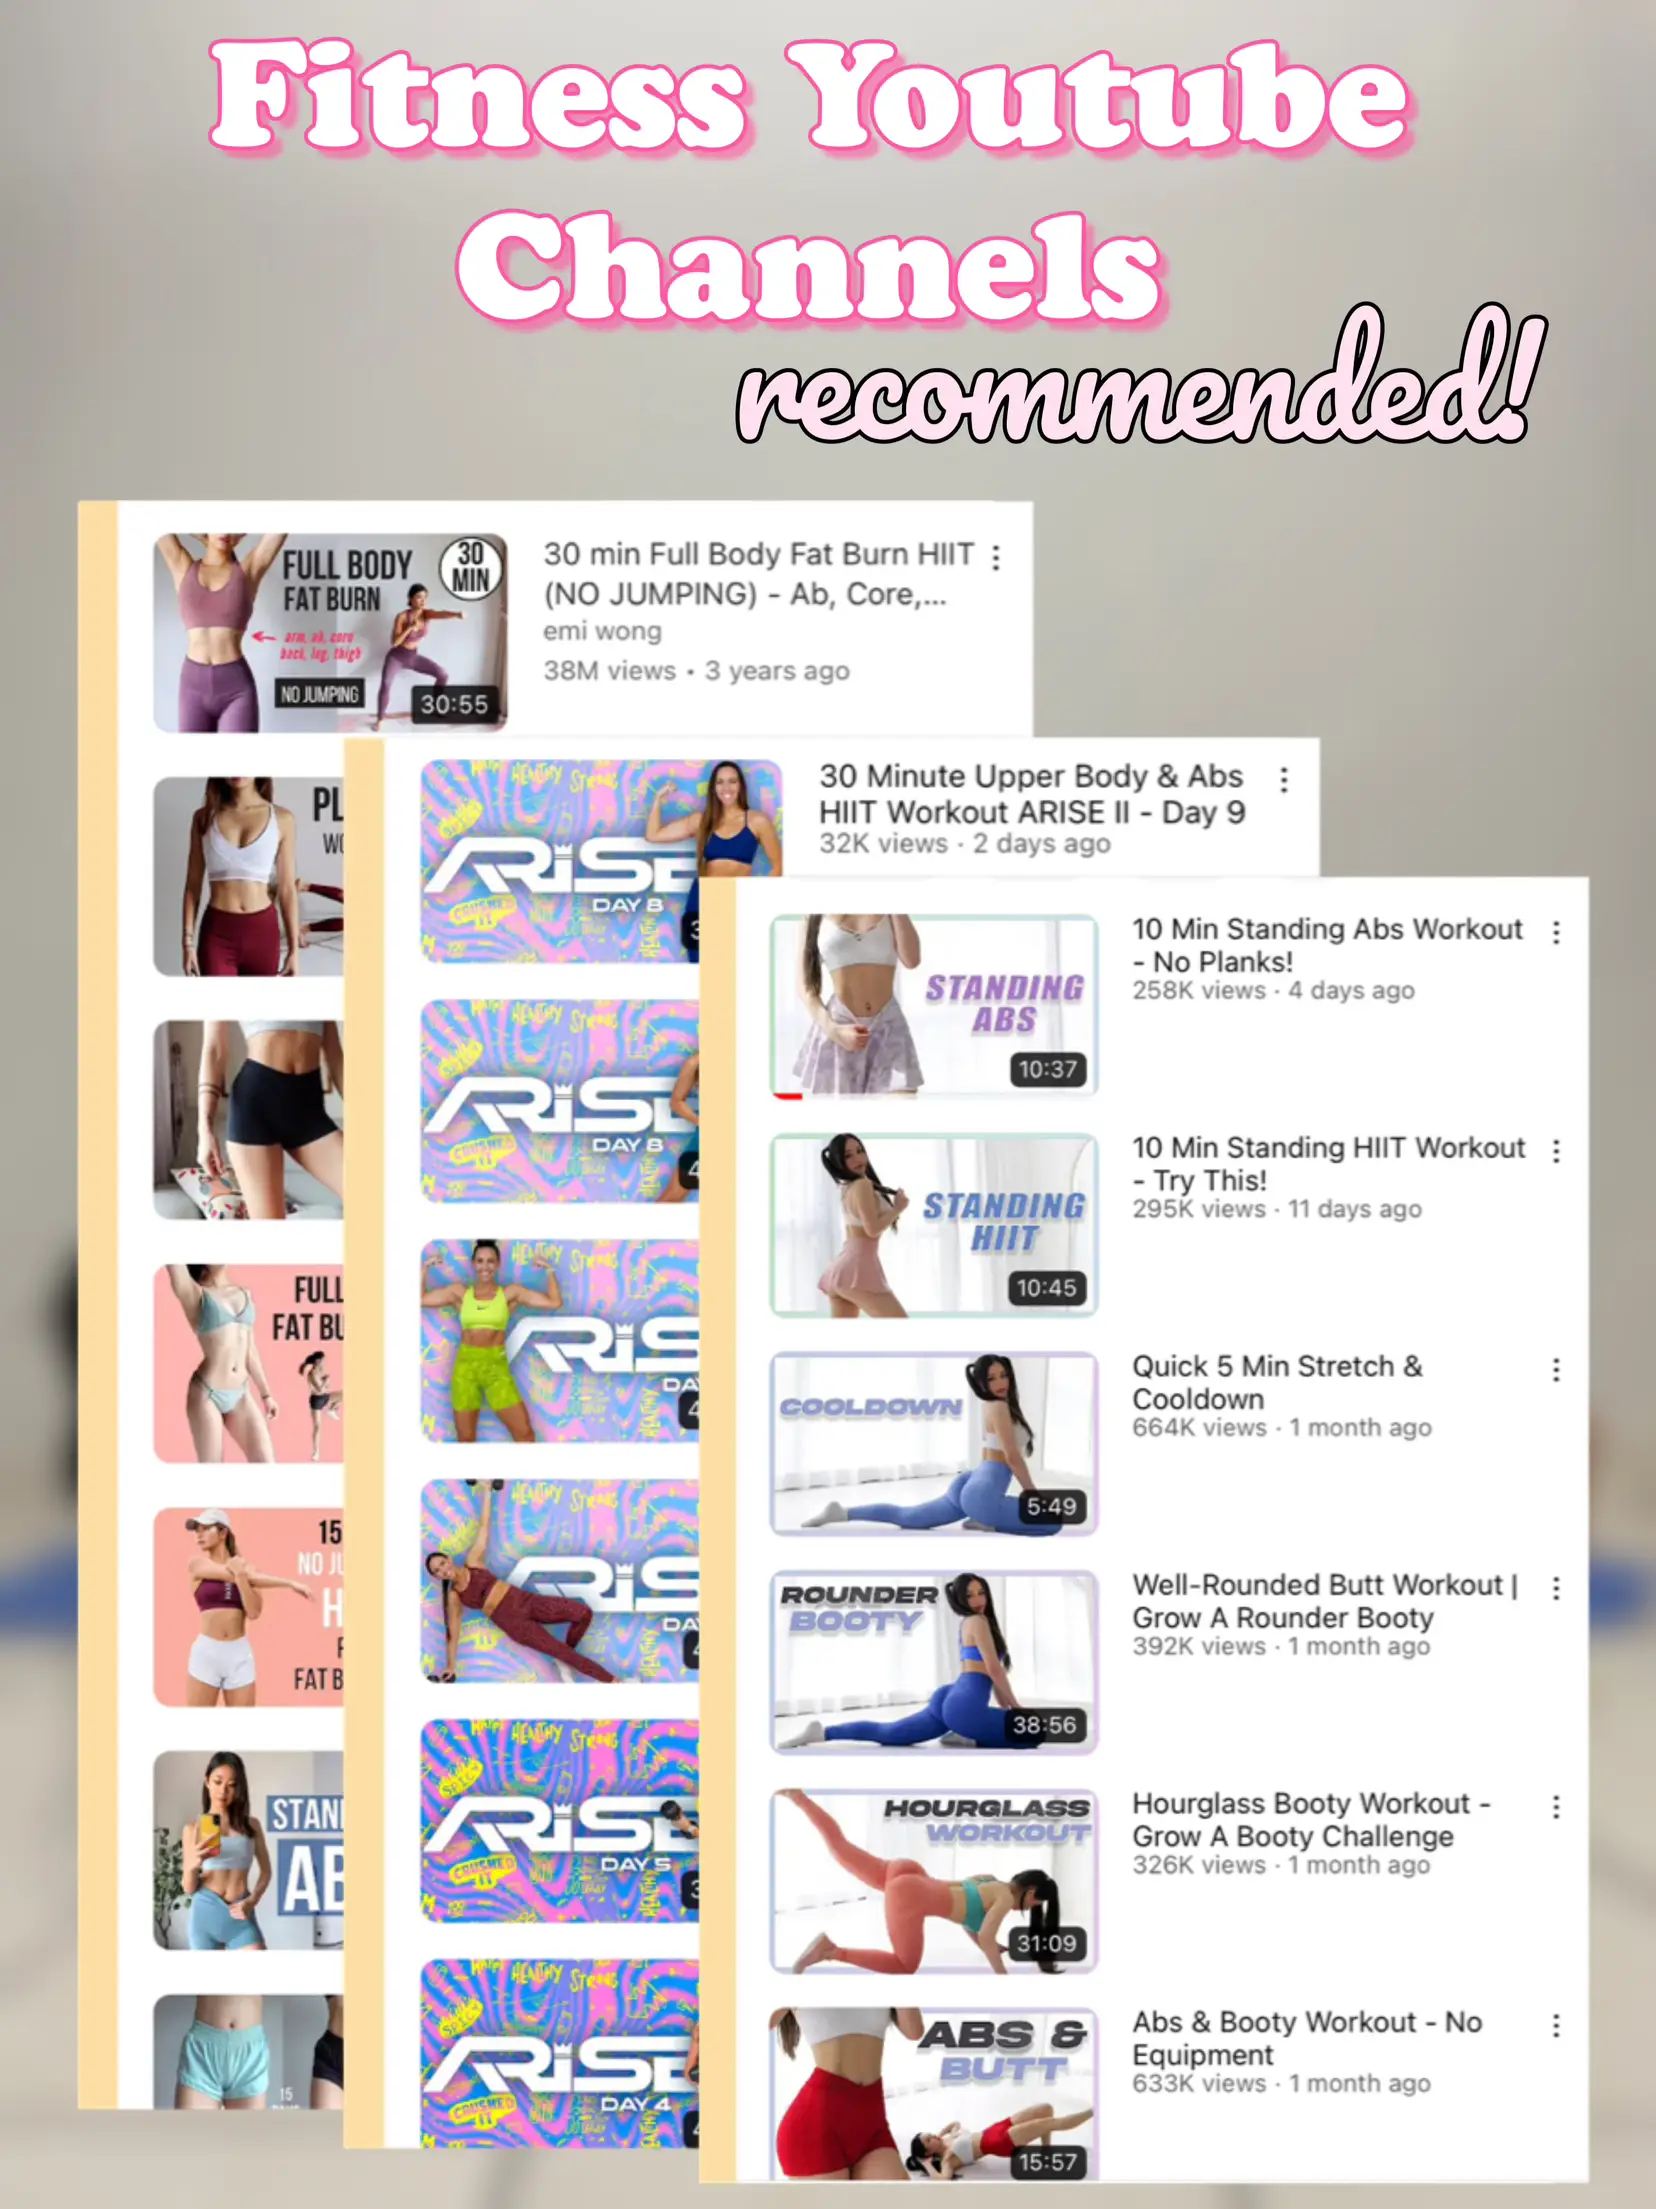 New to exercising? Check this out!, Galeri disiarkan oleh Evianne Ford